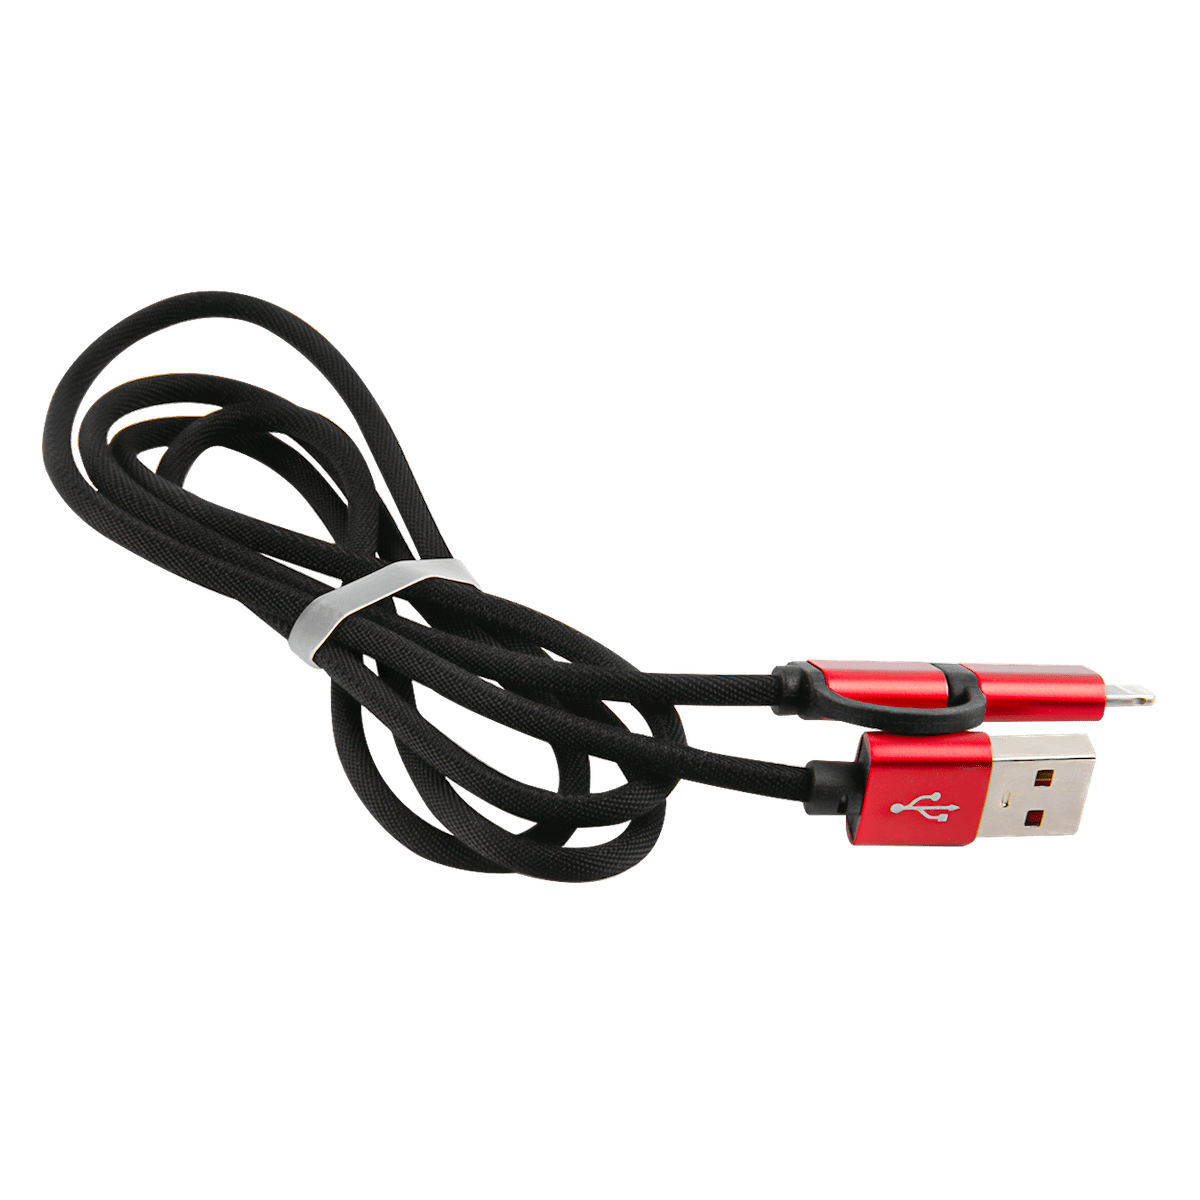 Дата-кабель Red Line LX01 2 in 1, USB - microUSB+8-pin